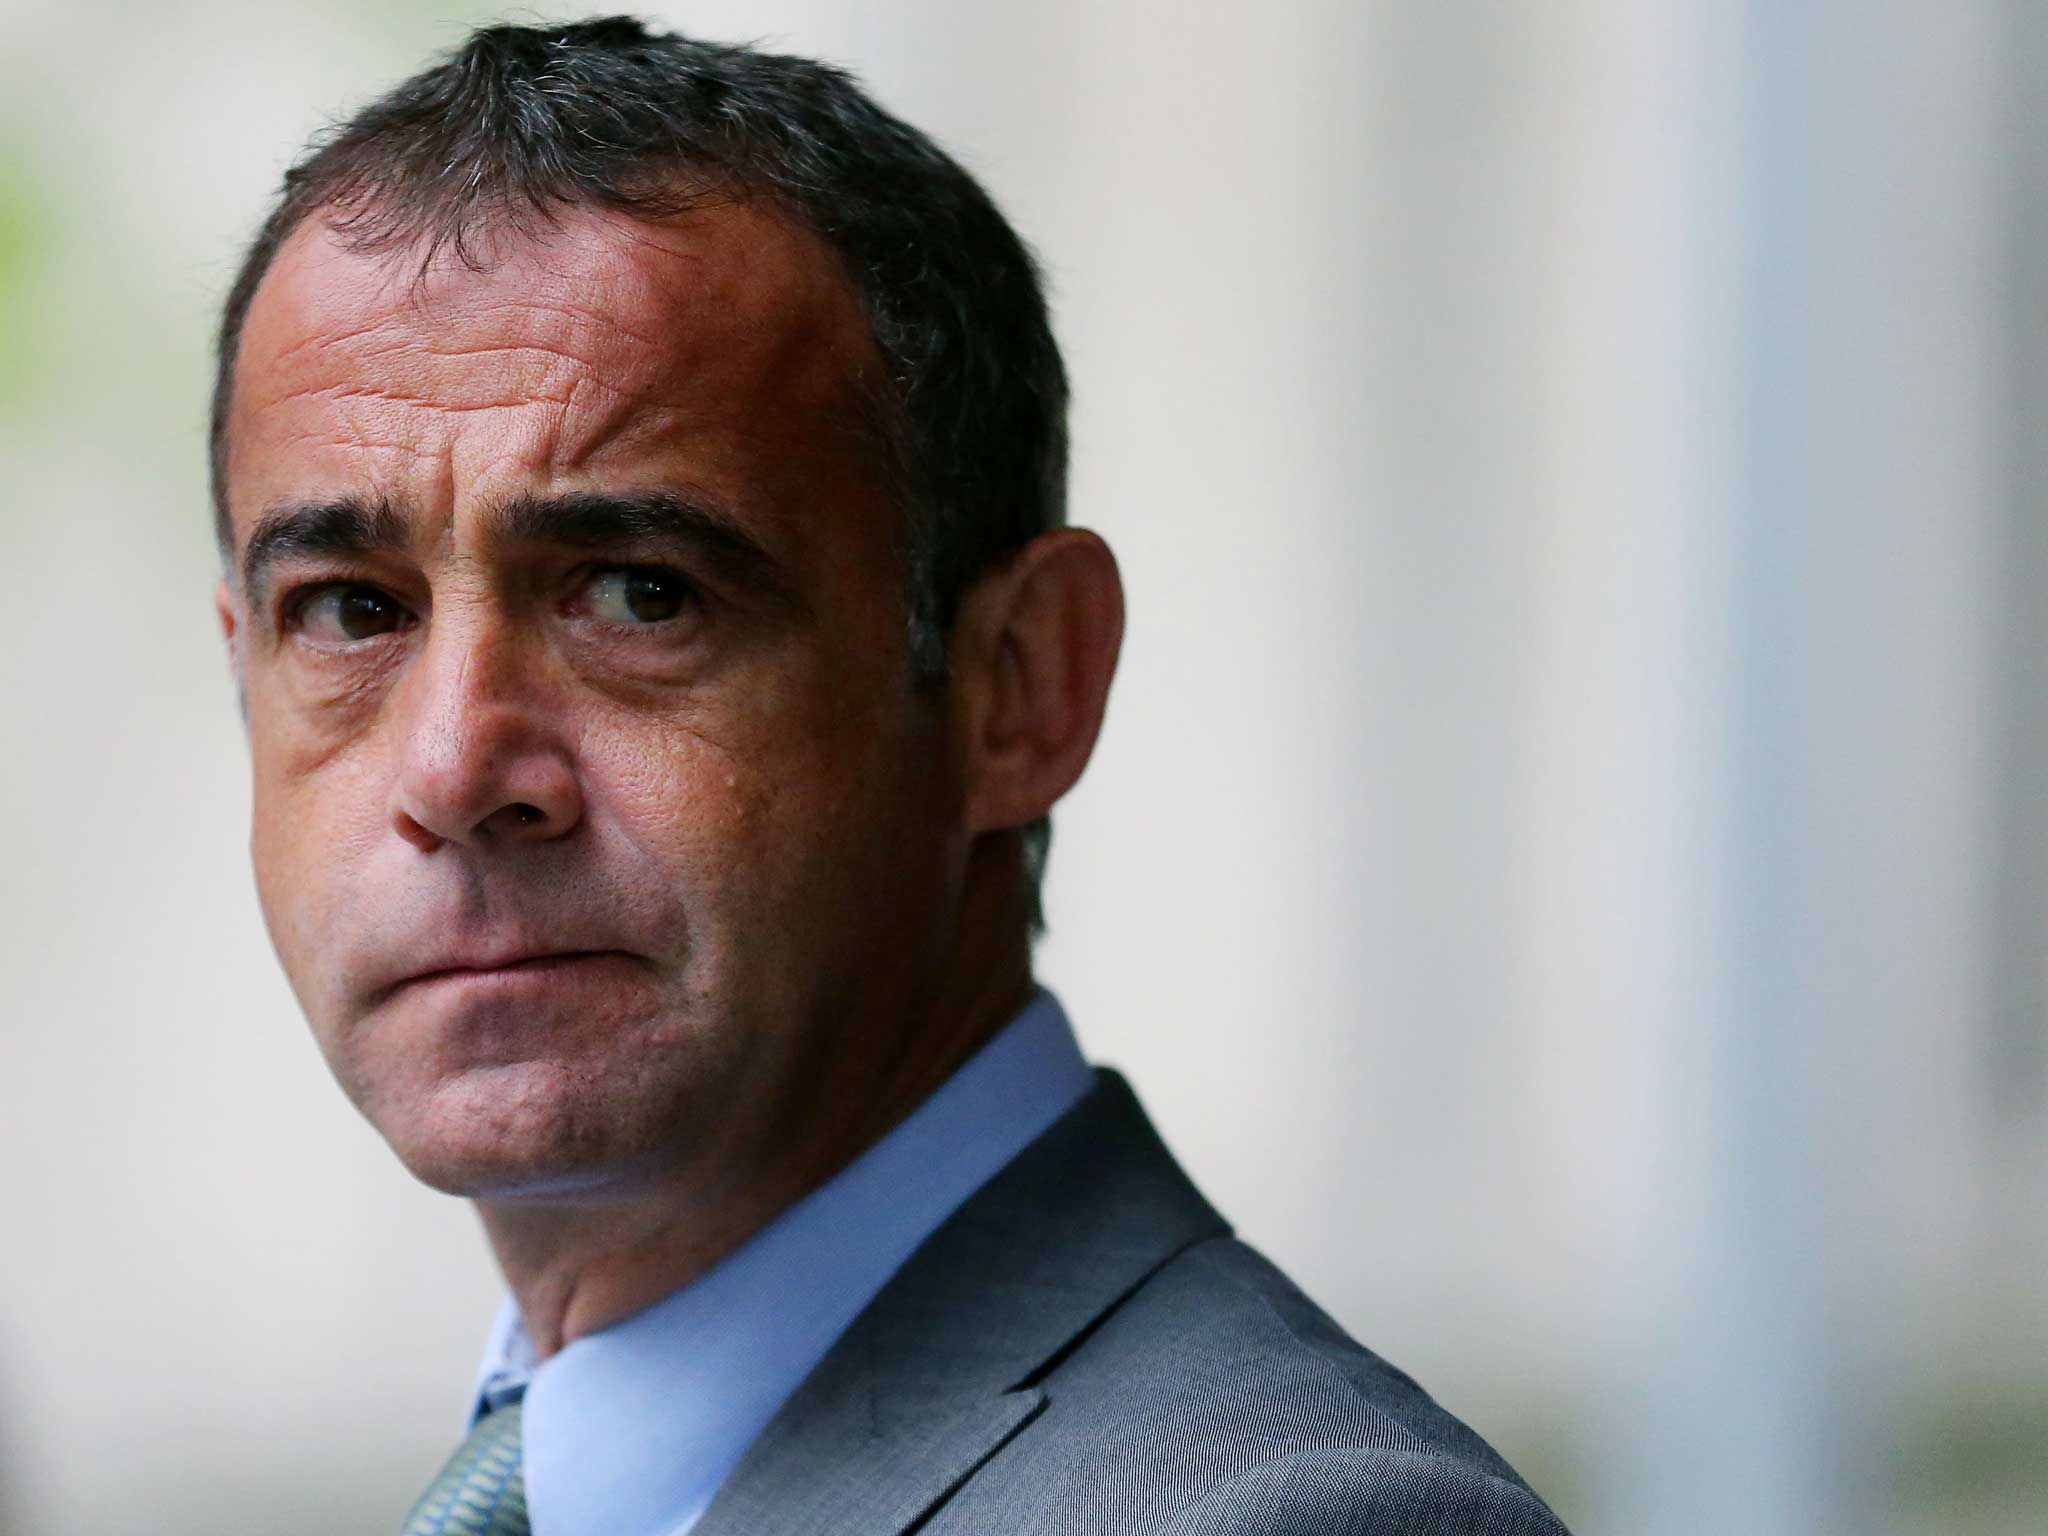 Coronation Street star Michael Le Vell awaits a decision from the jury